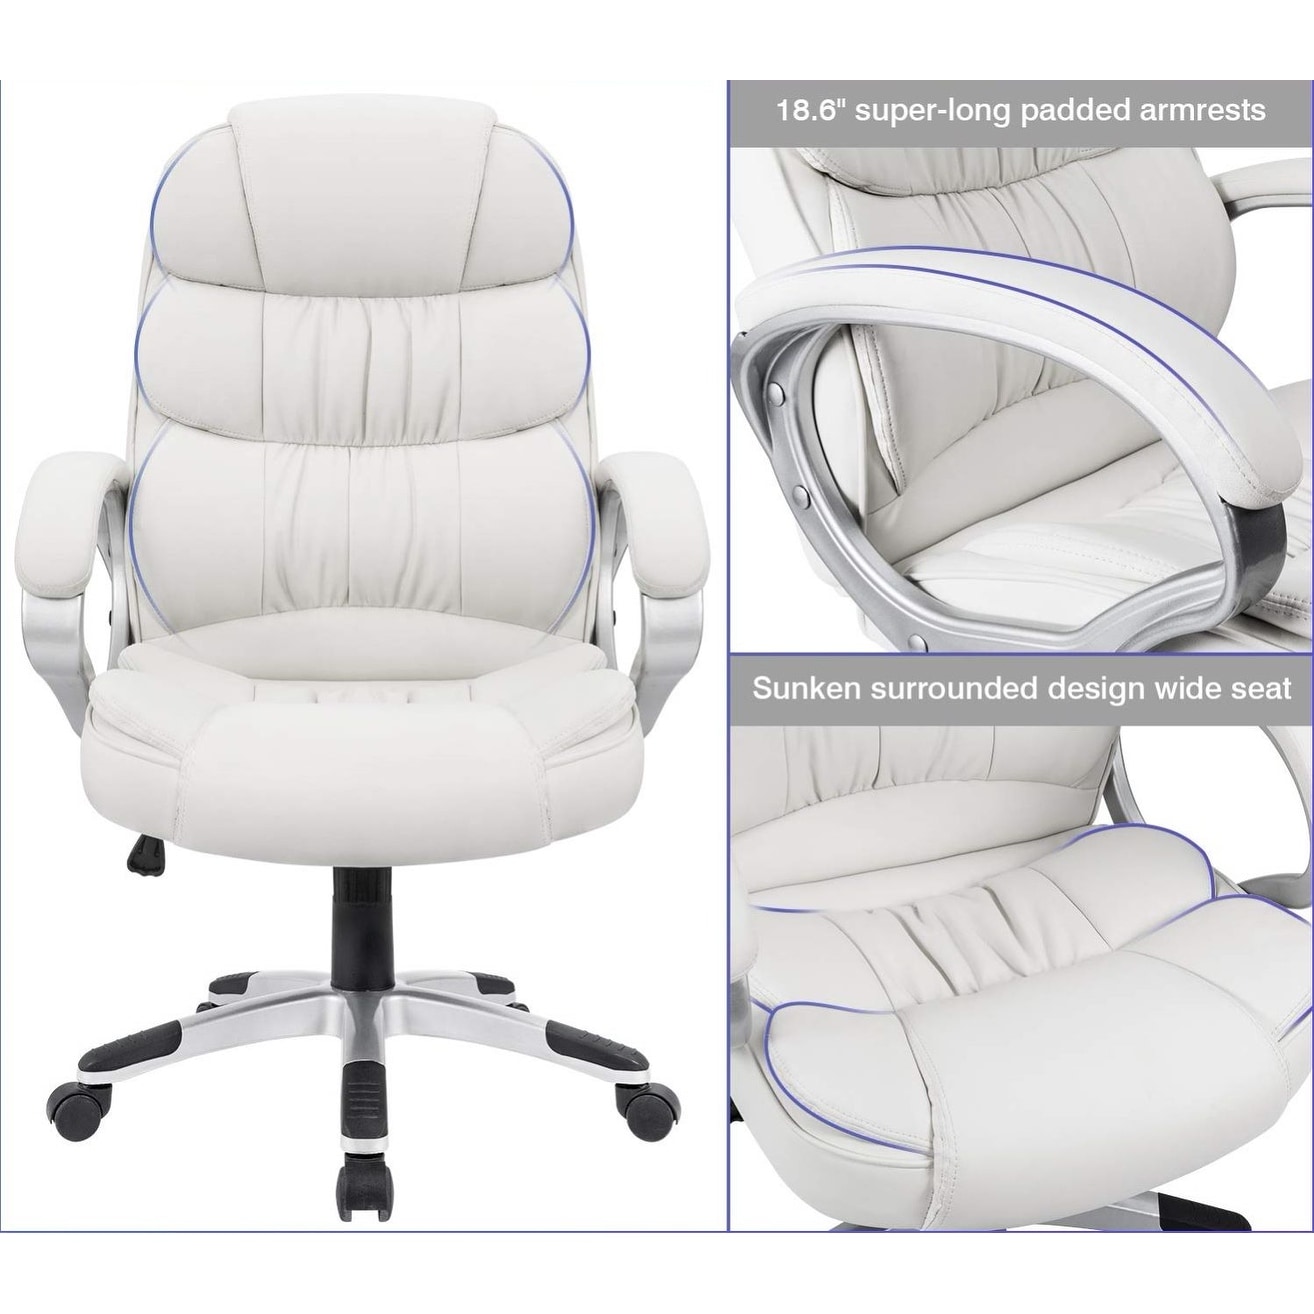 https://ak1.ostkcdn.com/images/products/is/images/direct/3d894e4c21179cd2631e6d31ba68516a3143ceb6/Homall-Office-Chair-High-Back-Computer-Ergonomic-Desk-Chair-PU-Leather-Adjustable-Height-Modern-Executive-Swivel-Task-Chair.jpg